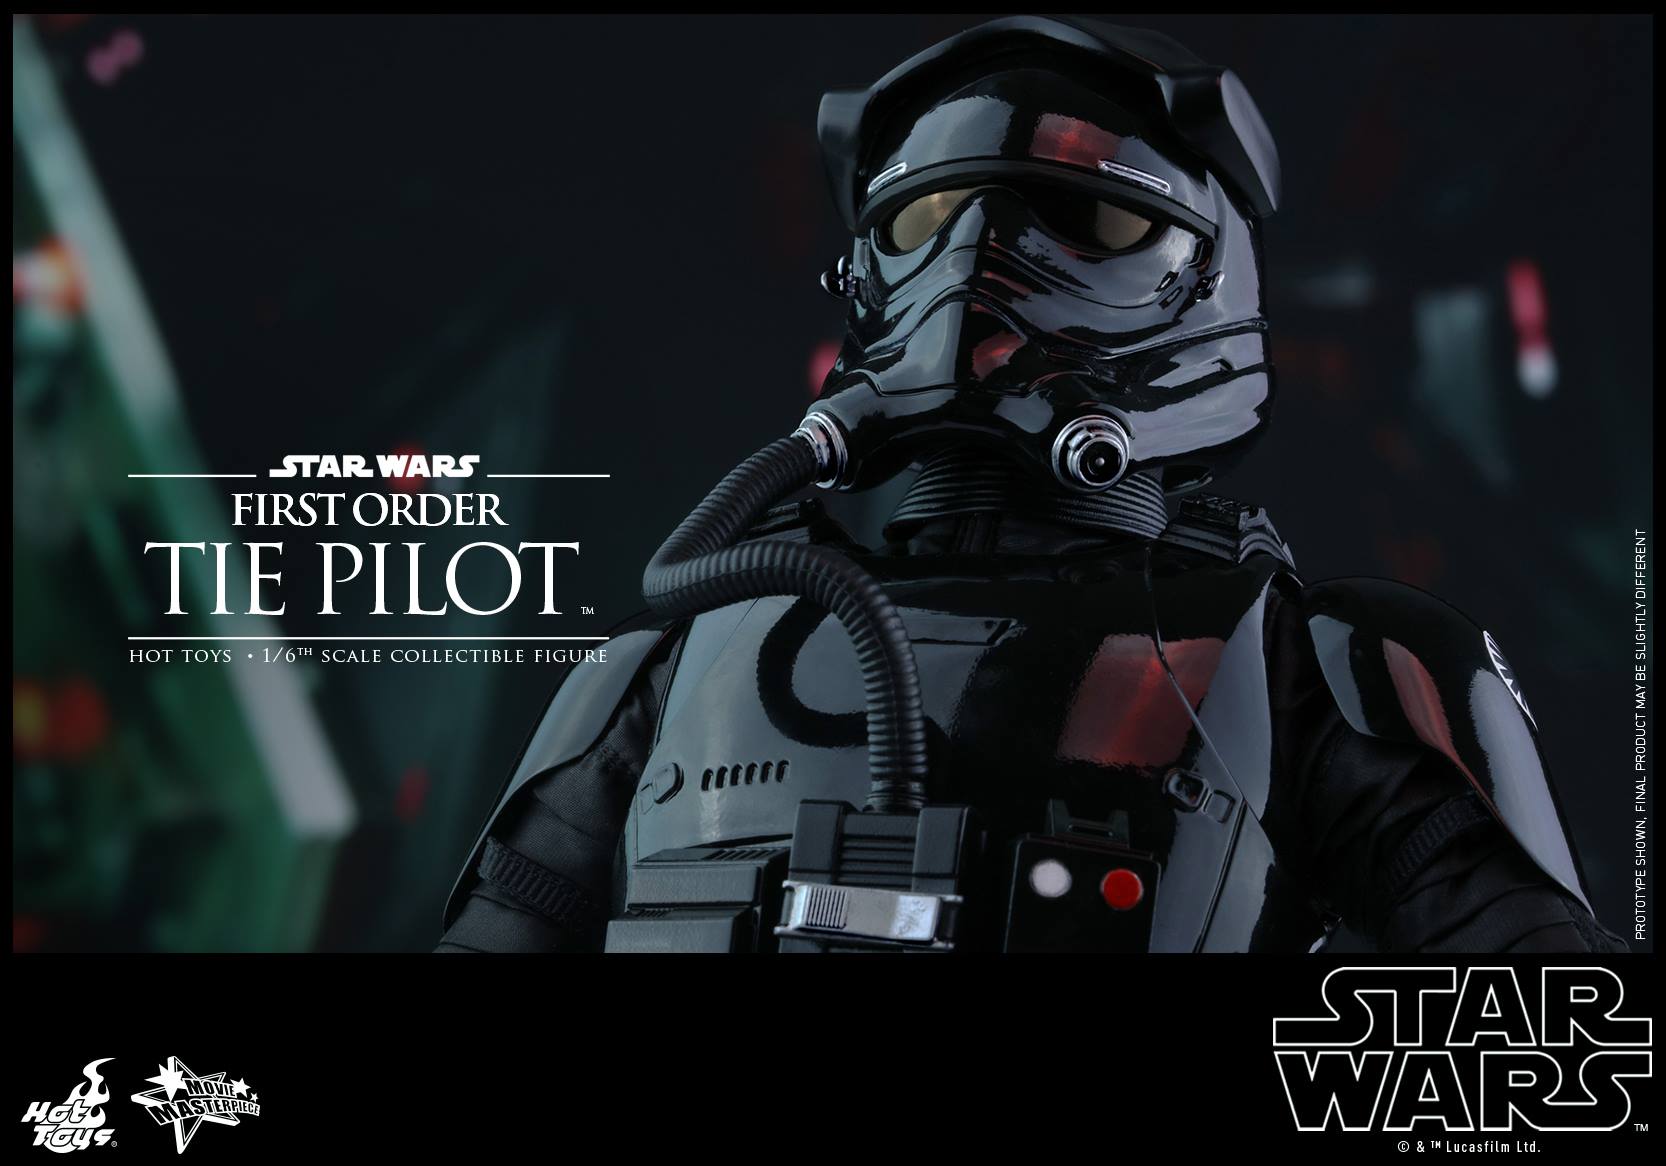 Hot Toys Reveals Star Wars: The Force Awakens 1 6th Scale First Order TIE Pilot Figure. Outer Rim News